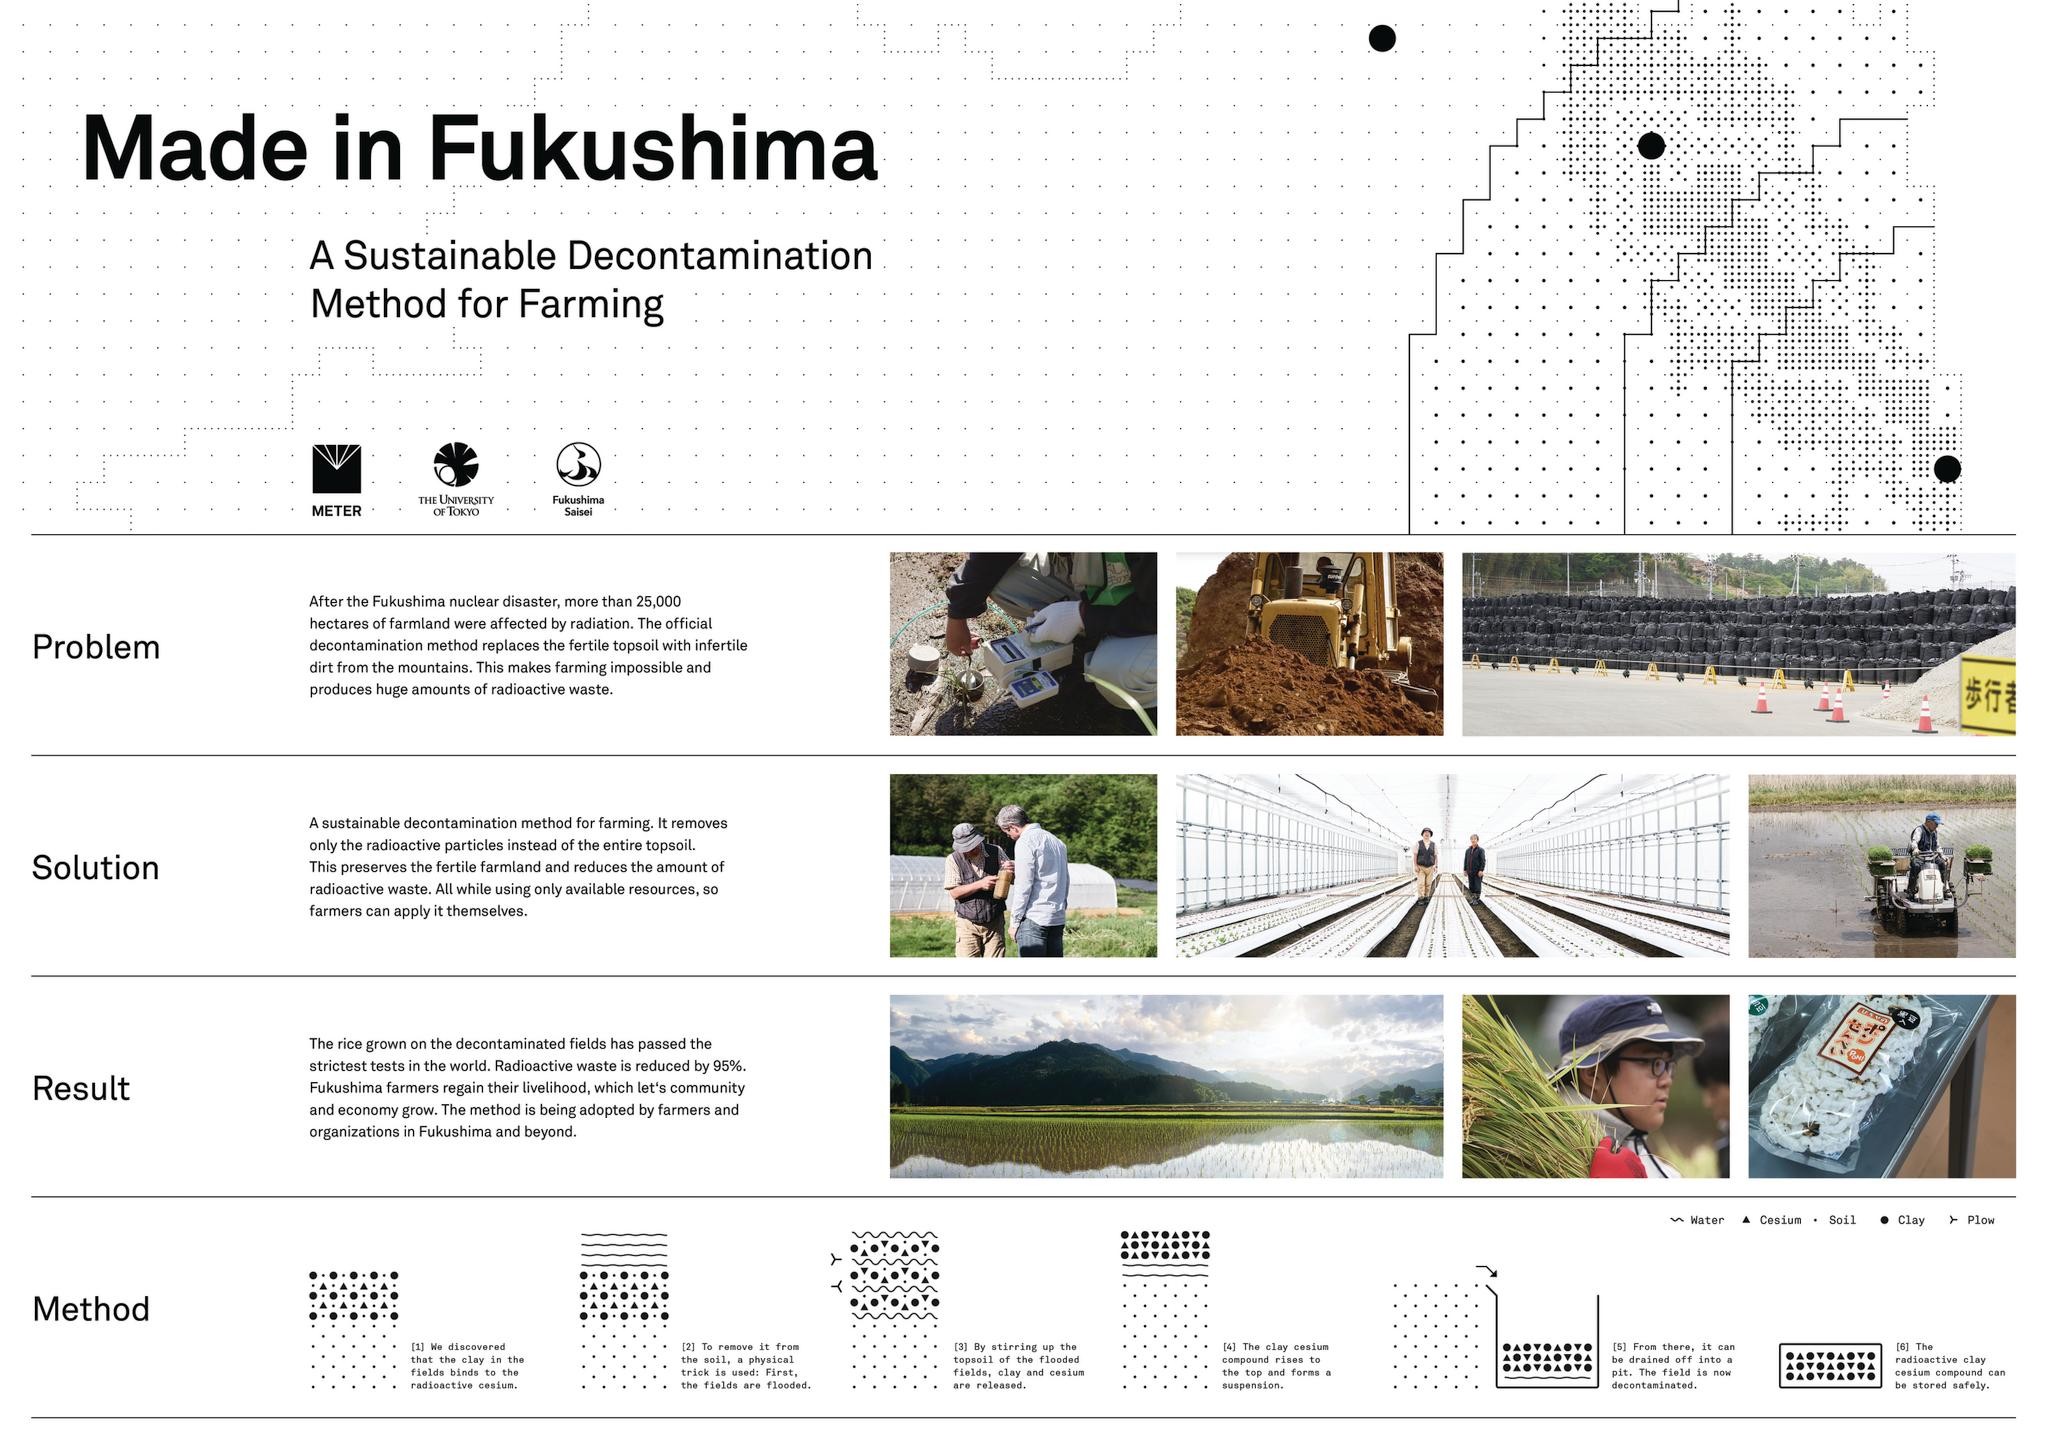 MADE IN FUKUSHIMA. A SUSTAINABLE DECONTAMINATION METHOD FOR FARMING.